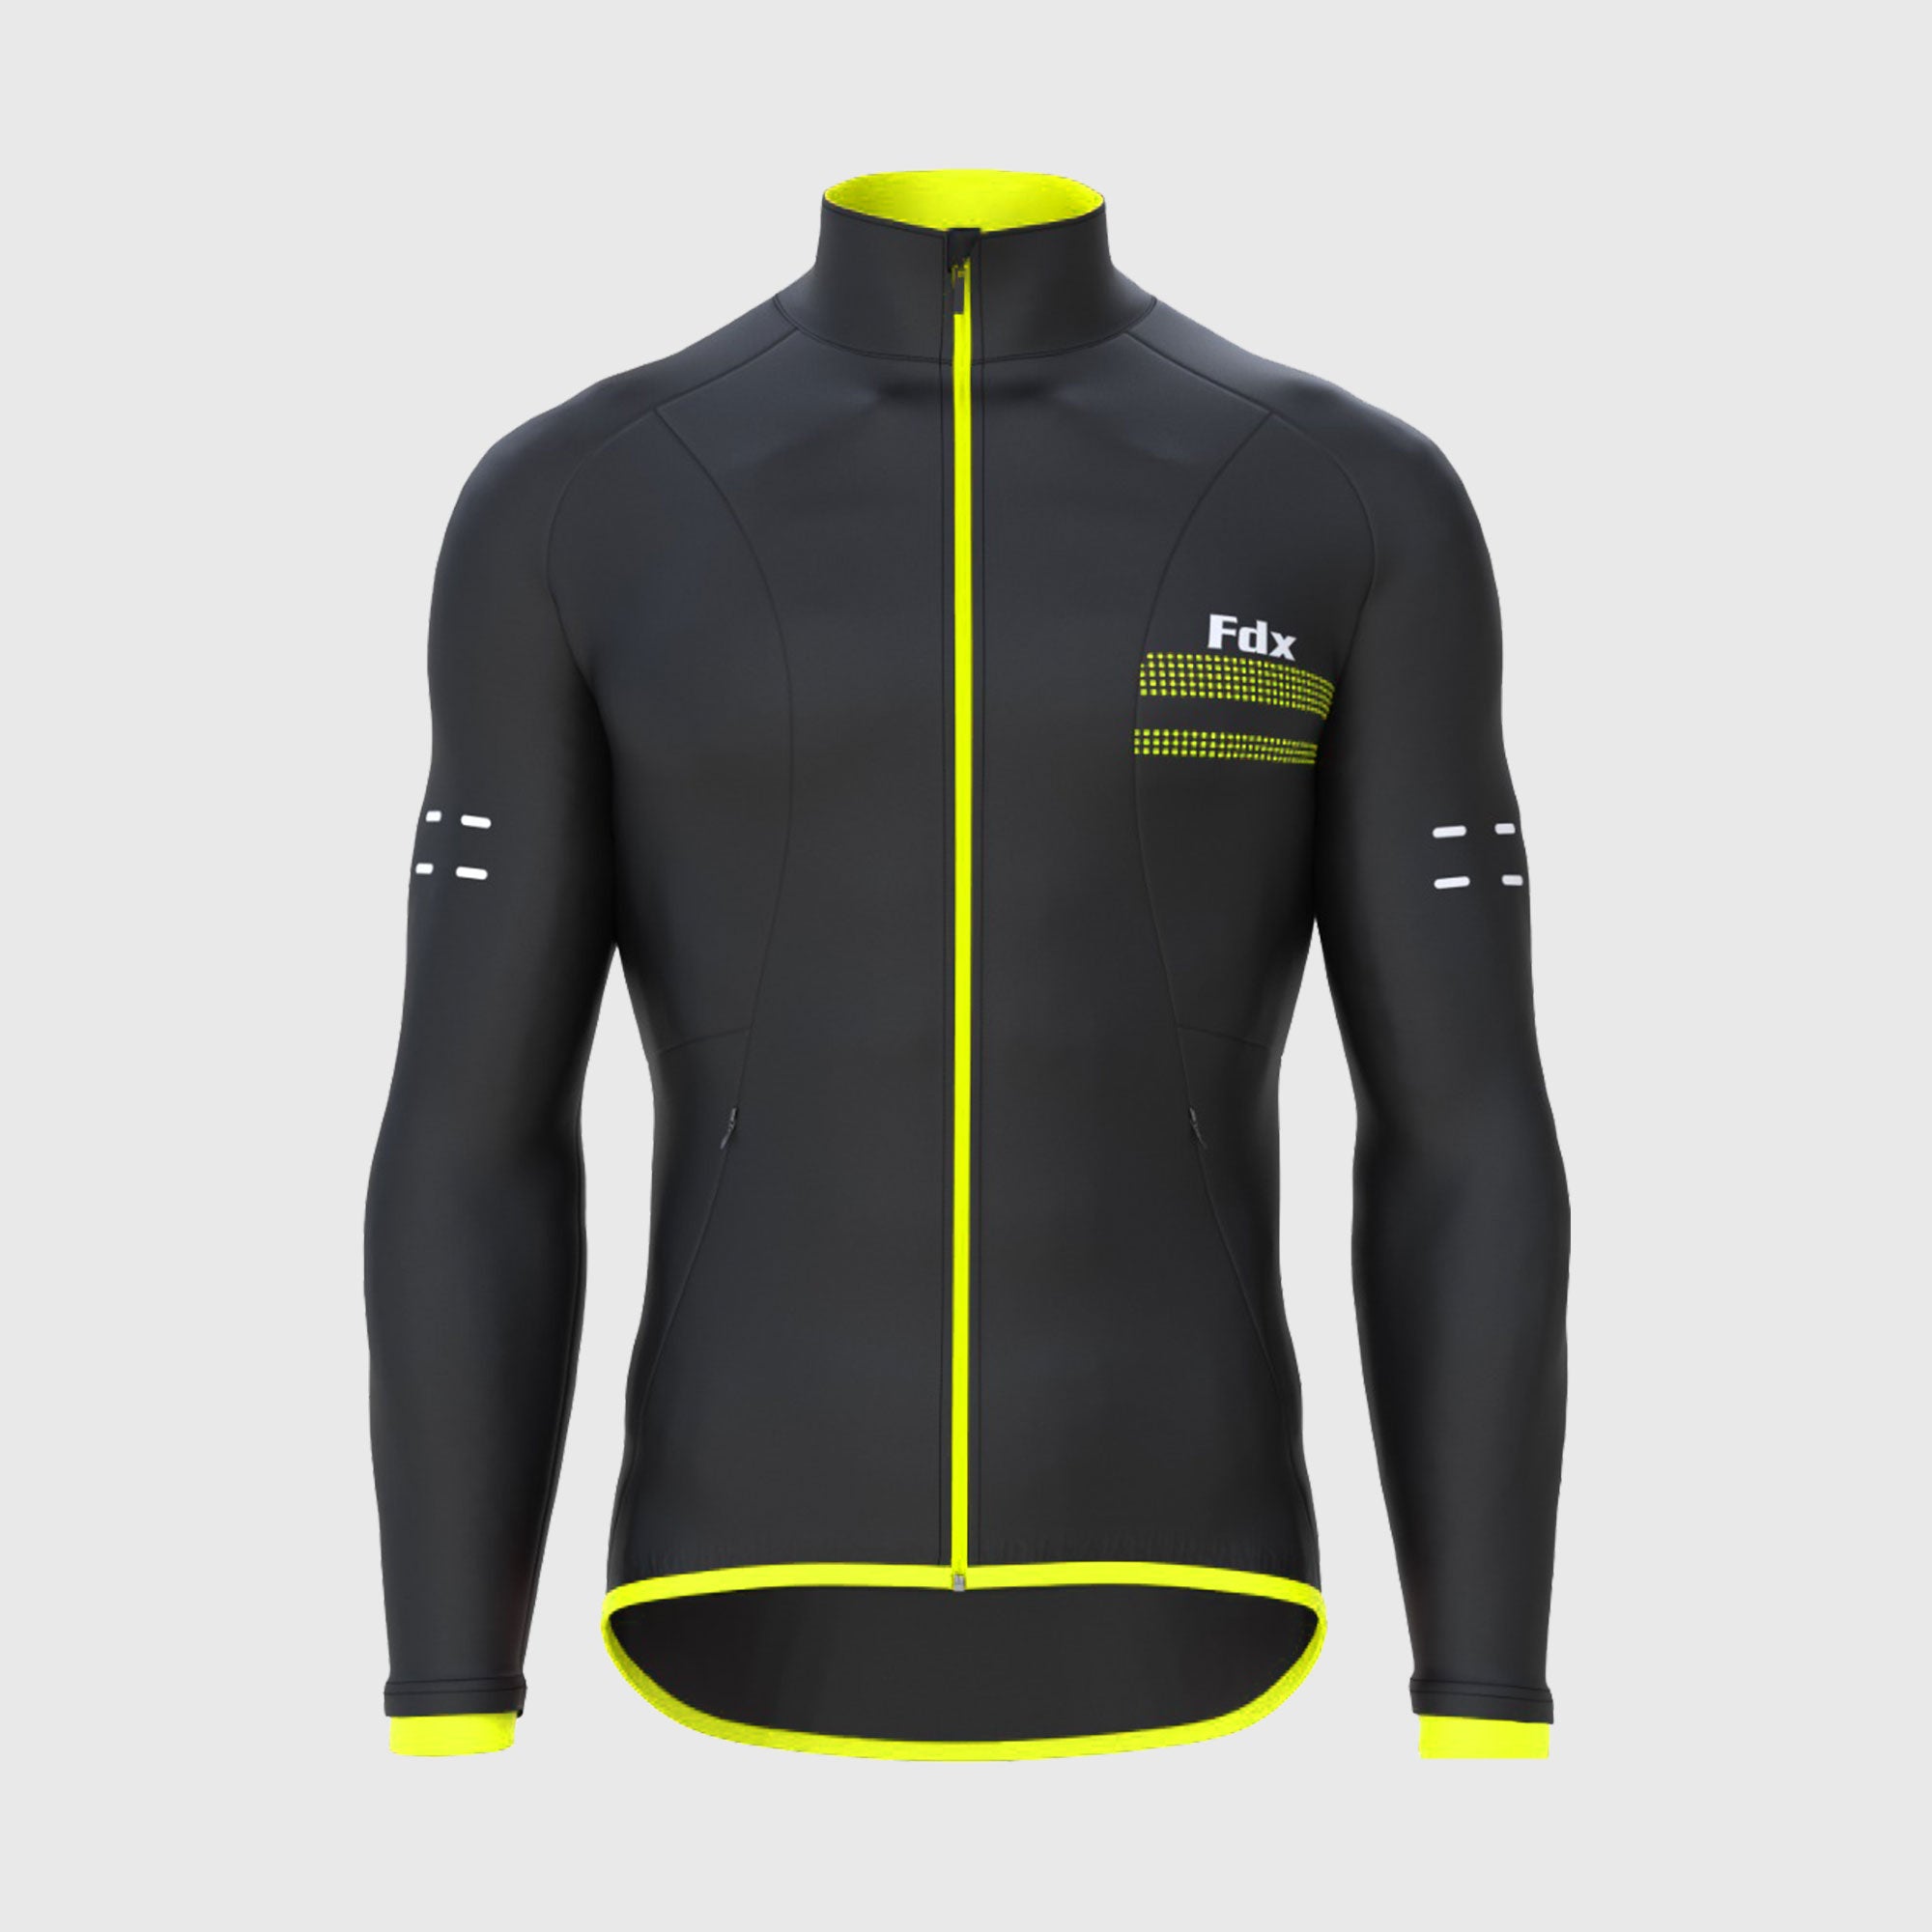 Fdx Arch Men's Fluorescent Yellow Windproof & Water Resistant Cycling Jacket